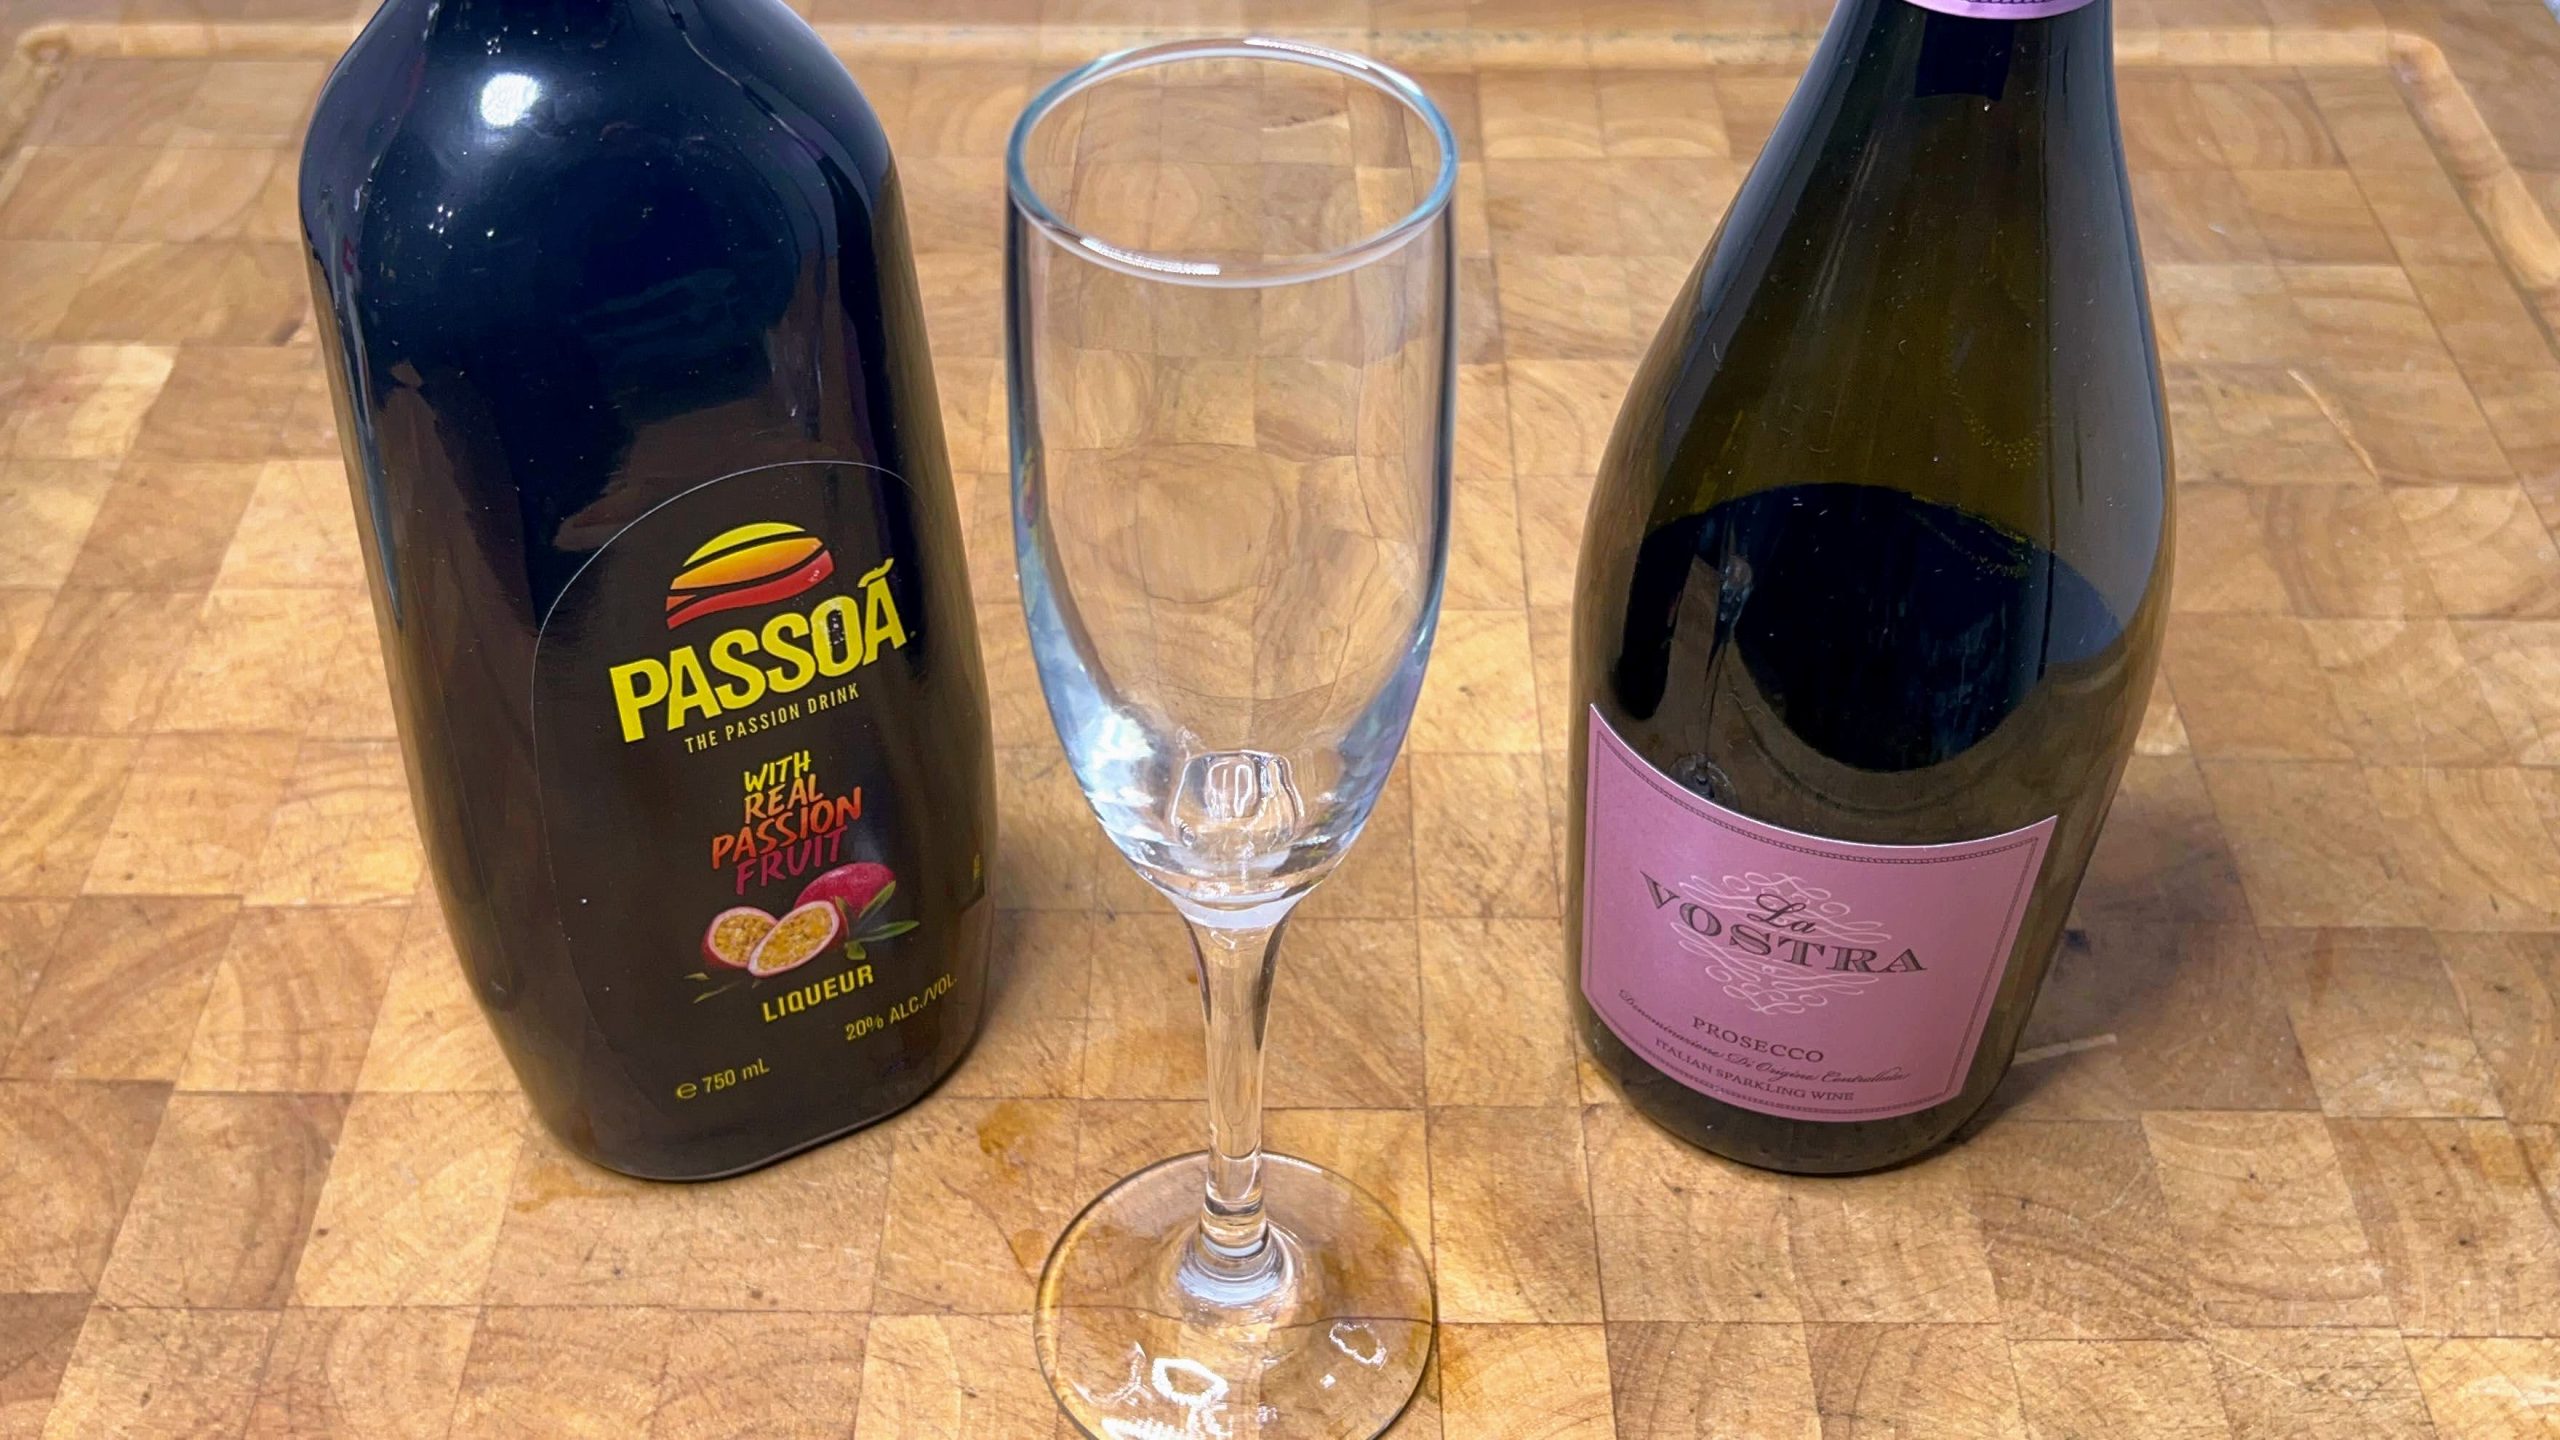 empty champagne flute with bottle of passoa and champagne next to it